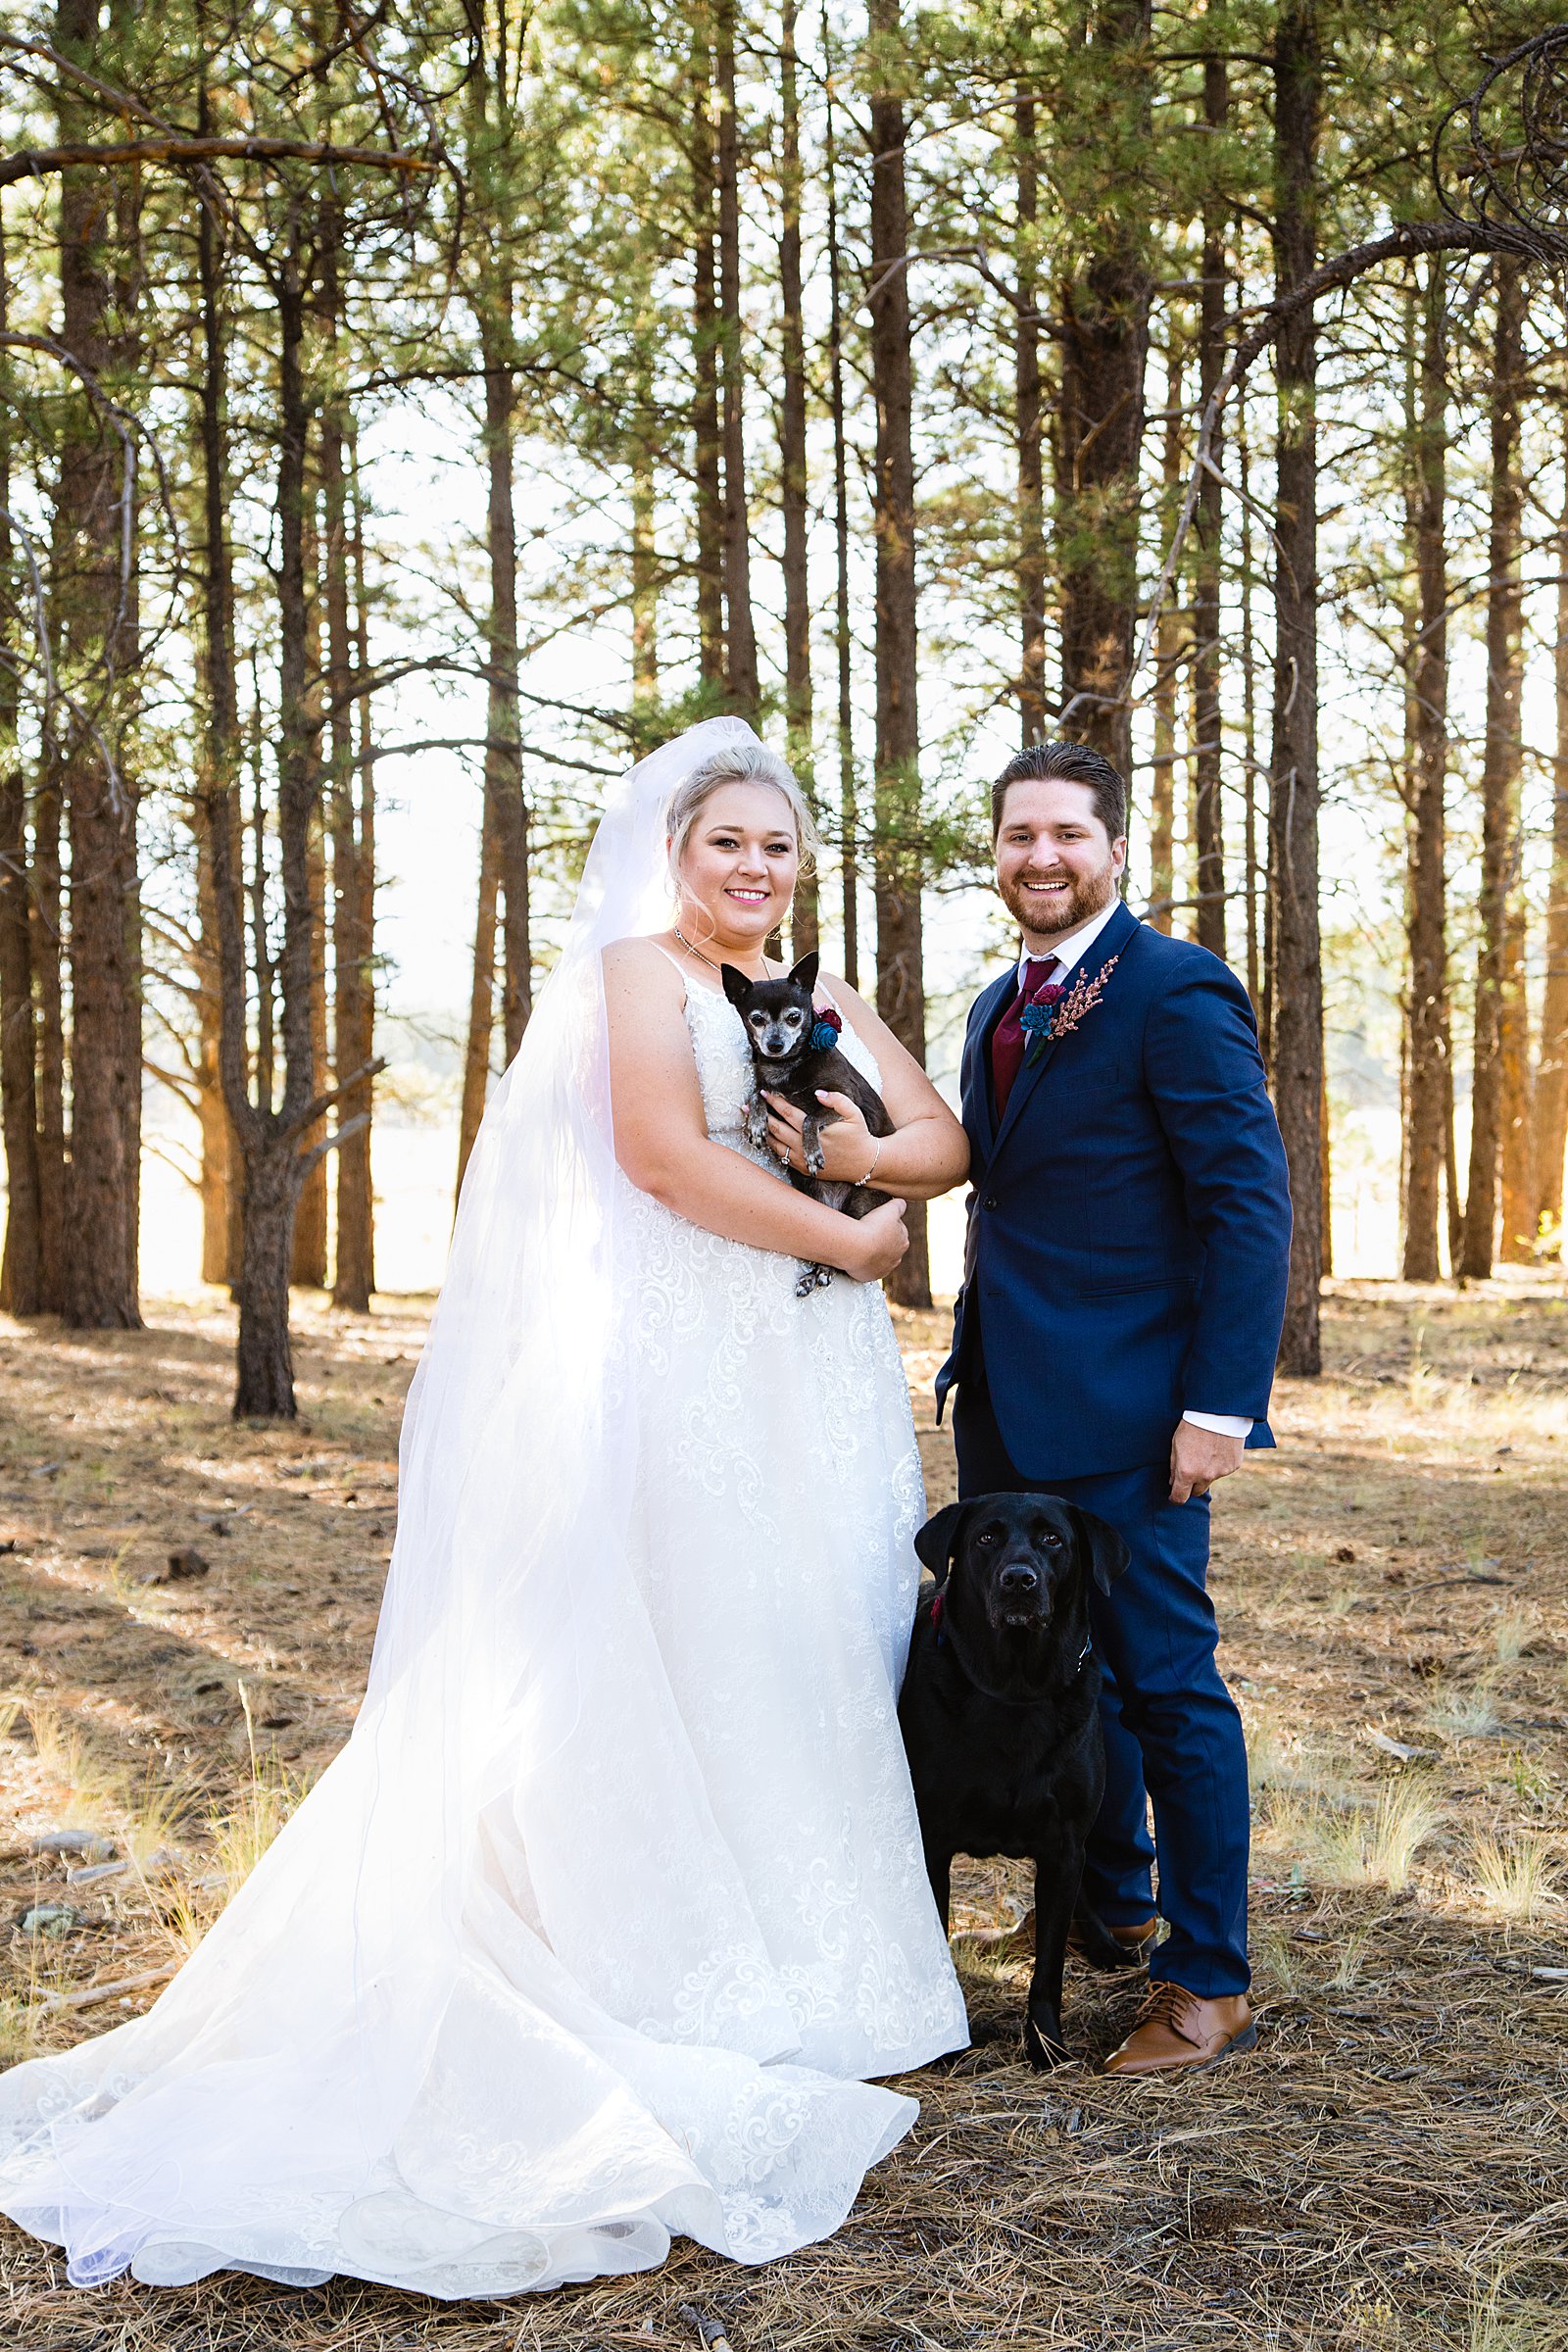 Bride and groom with their dogs on their wedding day by Flagstaff wedding photographer PMA Photography.